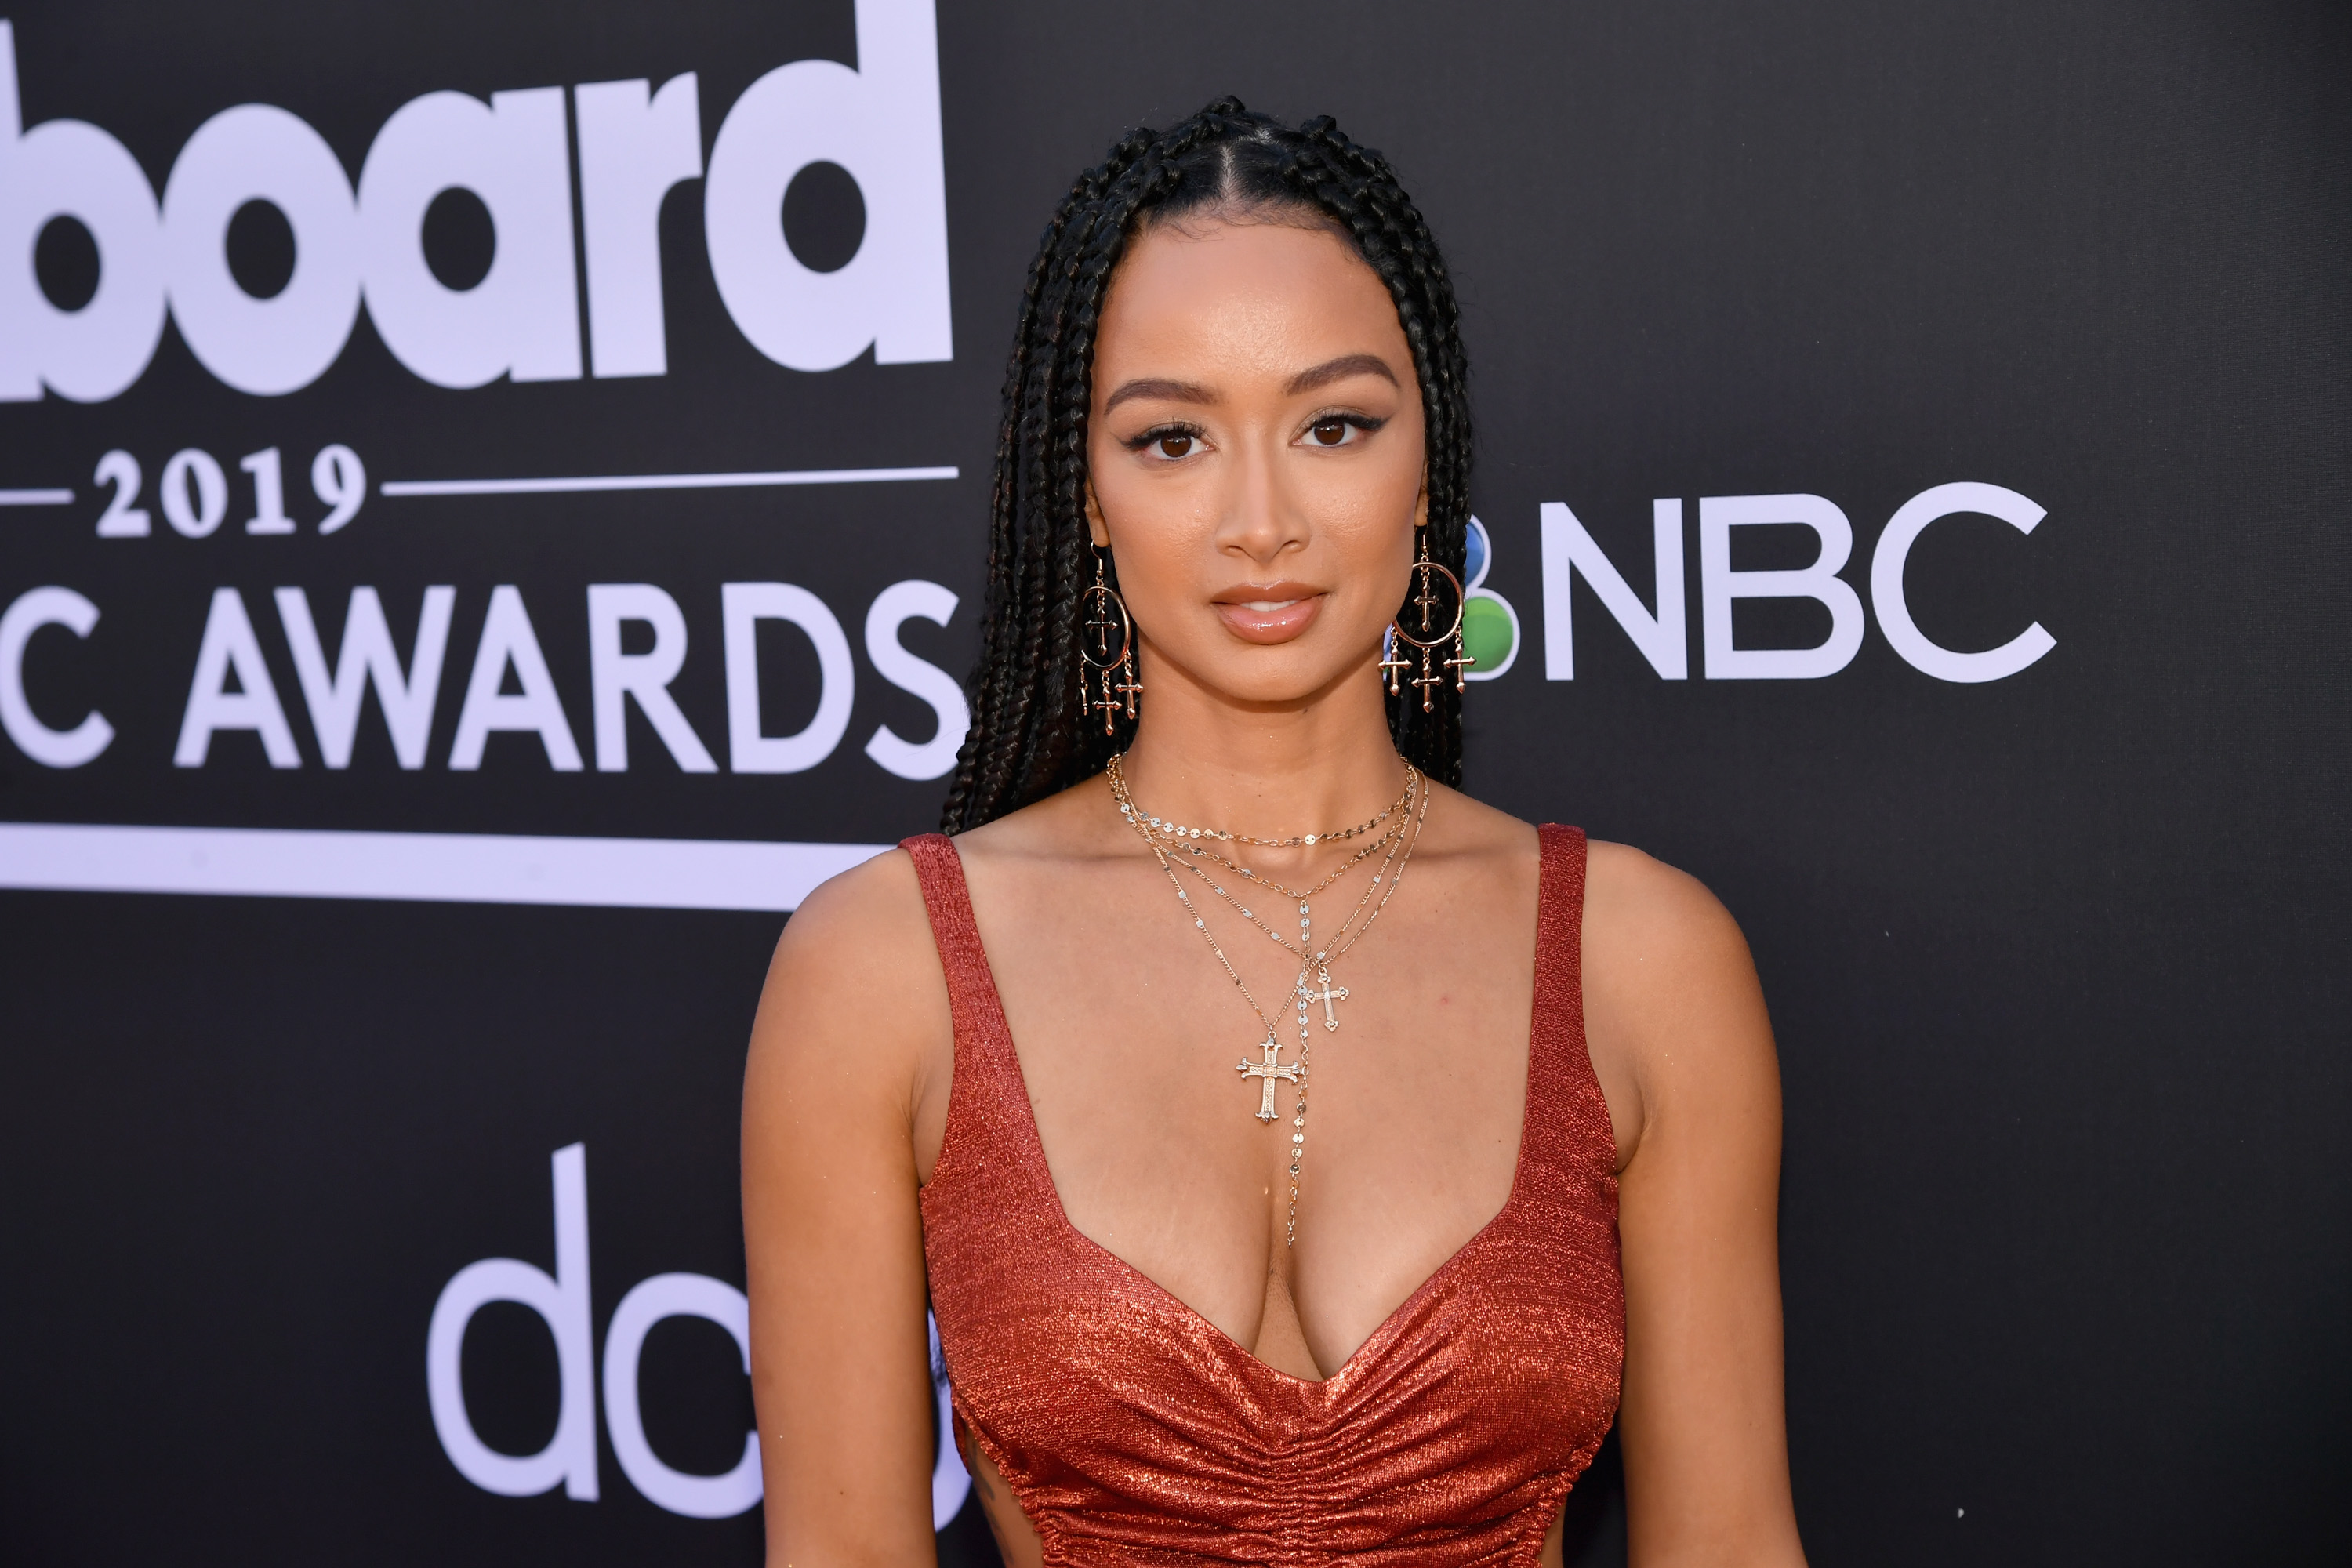 Draya Michele attends the 2019 Billboard Music Awards at MGM Grand Garden Arena on May 1, 2019, in Las Vegas, Nevada. | Source: Getty Images